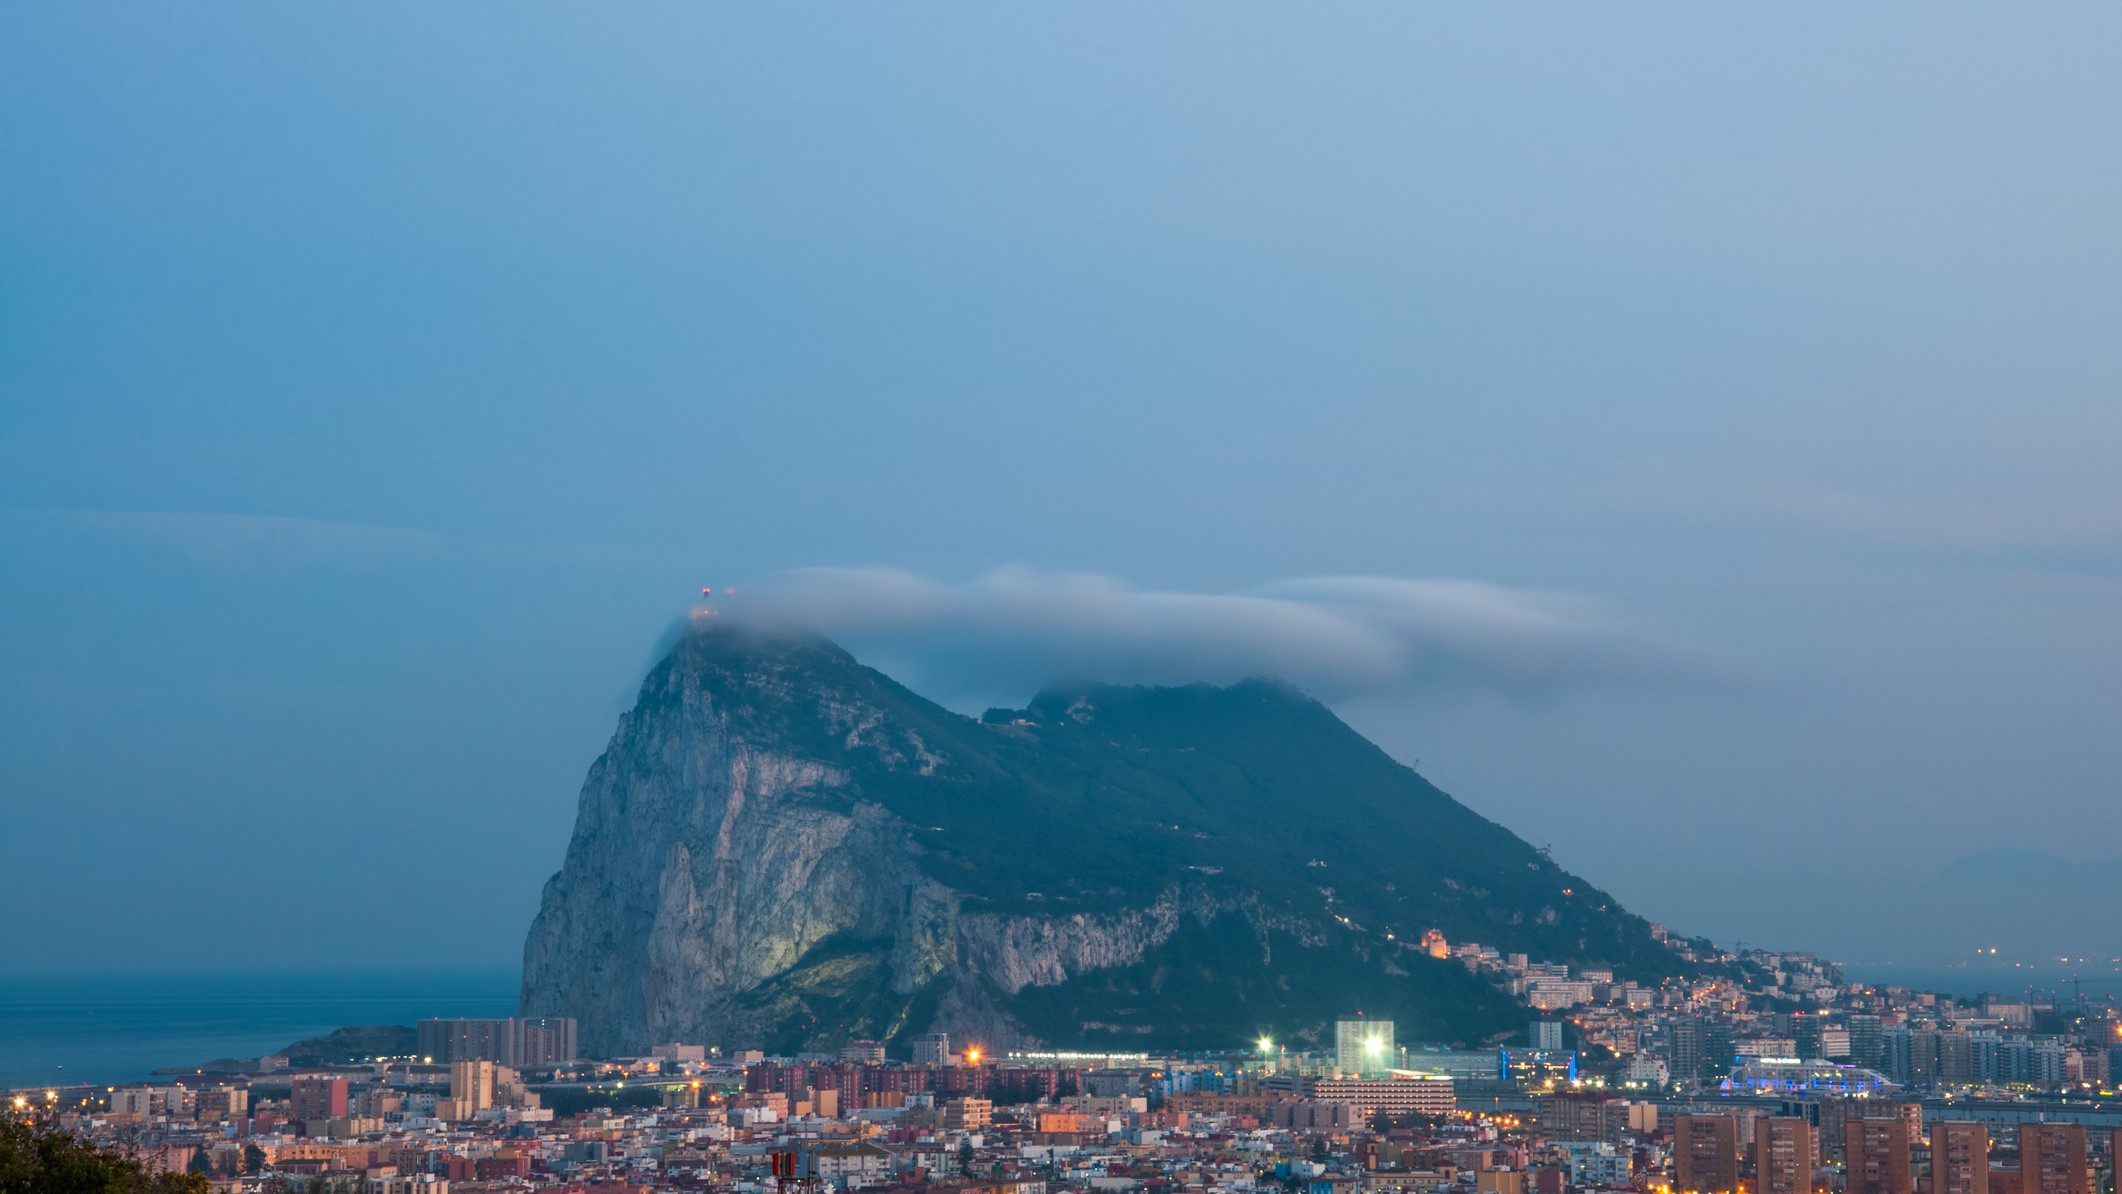 The Rock of Gibraltar at Dusk with the Levante Cloud forming above it. In the foreground is the sprawling border town of La Linea de la Concepción, Cadiz, Spain.